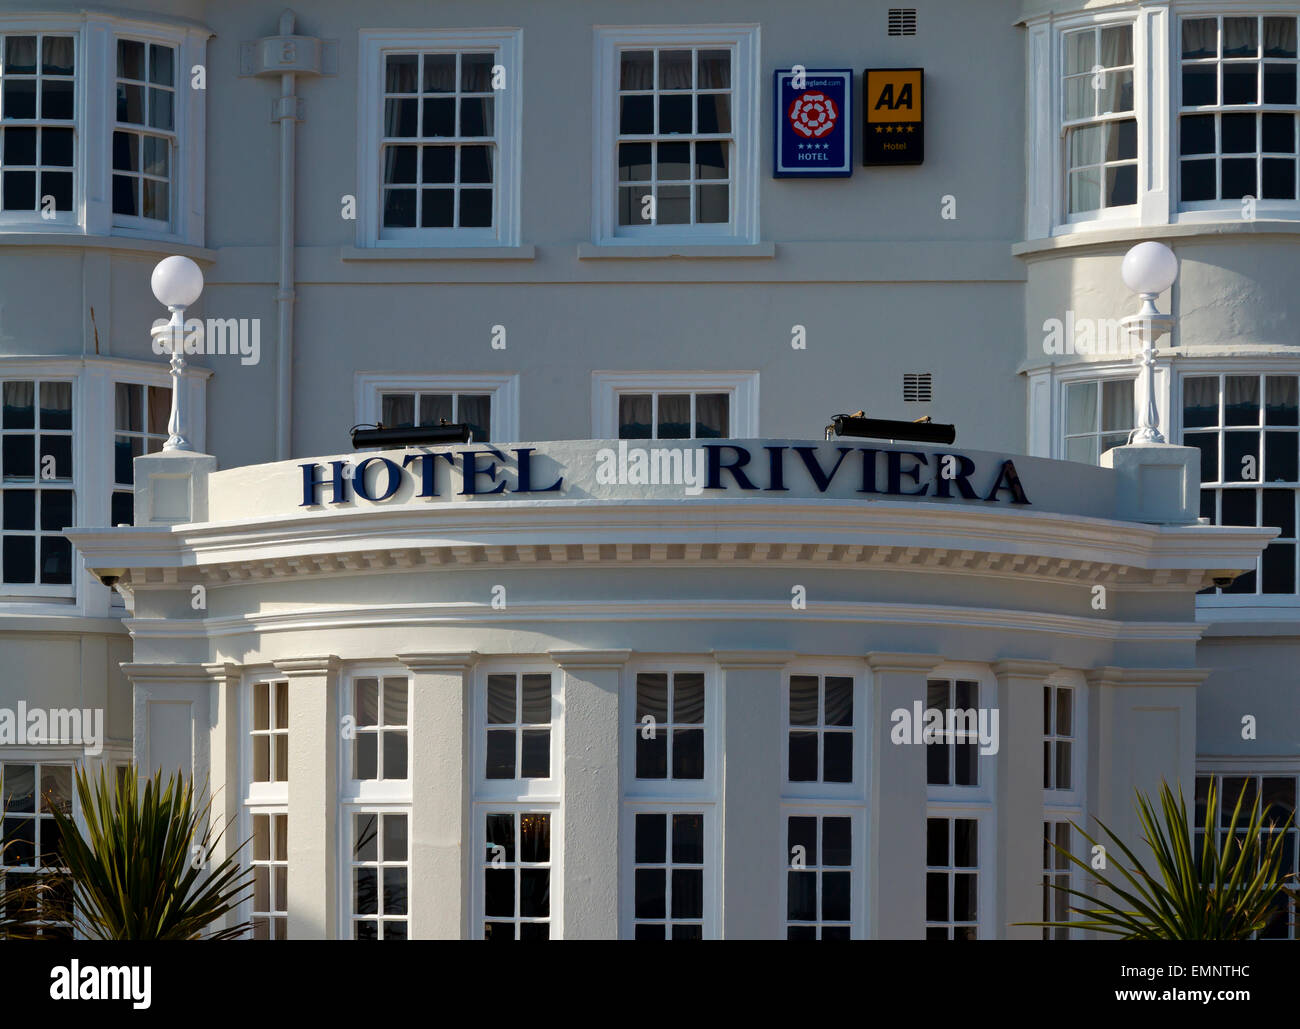 Regency facade of The Hotel Riviera on the Esplanade in Sidmouth a seaside resort in South Devon England UK Stock Photo